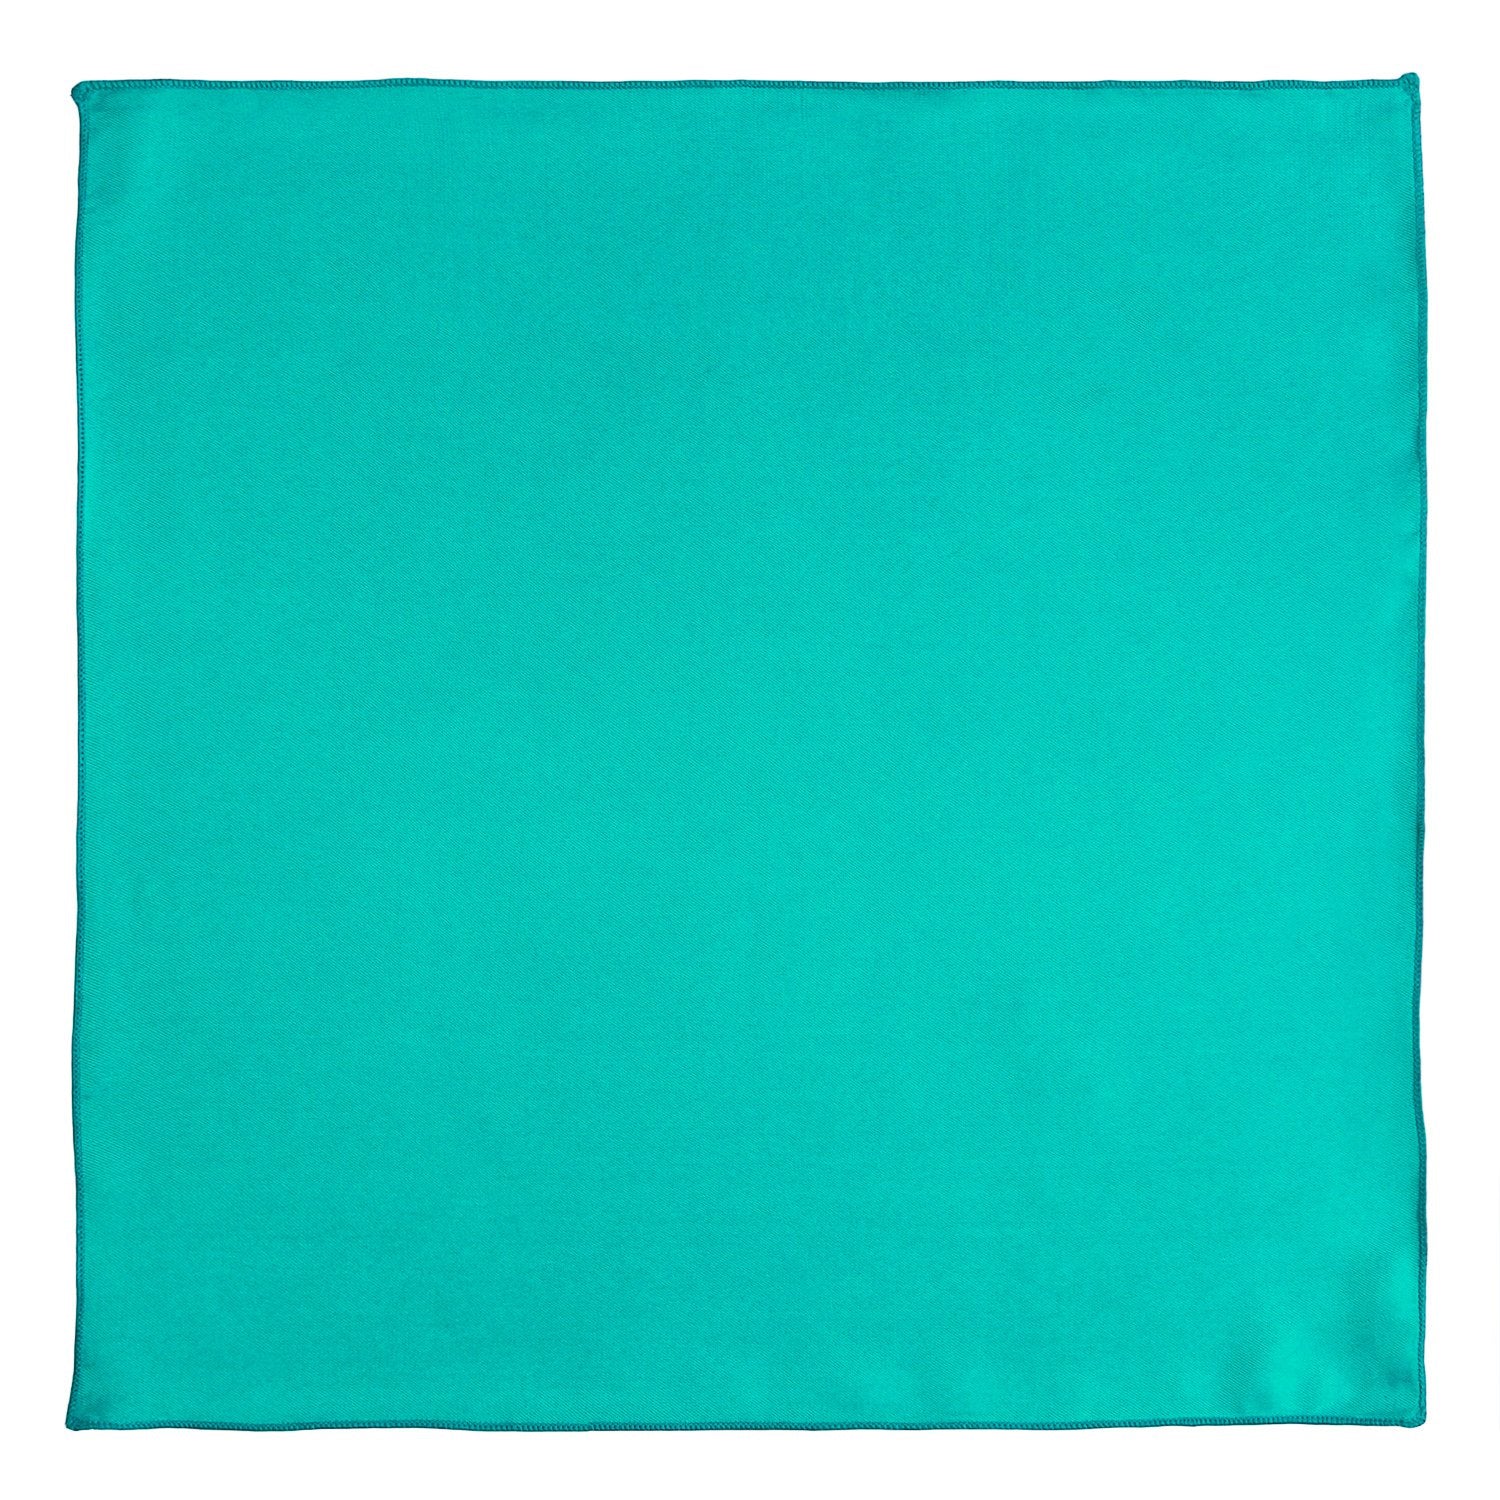 Chokore Turquoise Pure Silk Pocket Square, from the Solids Line